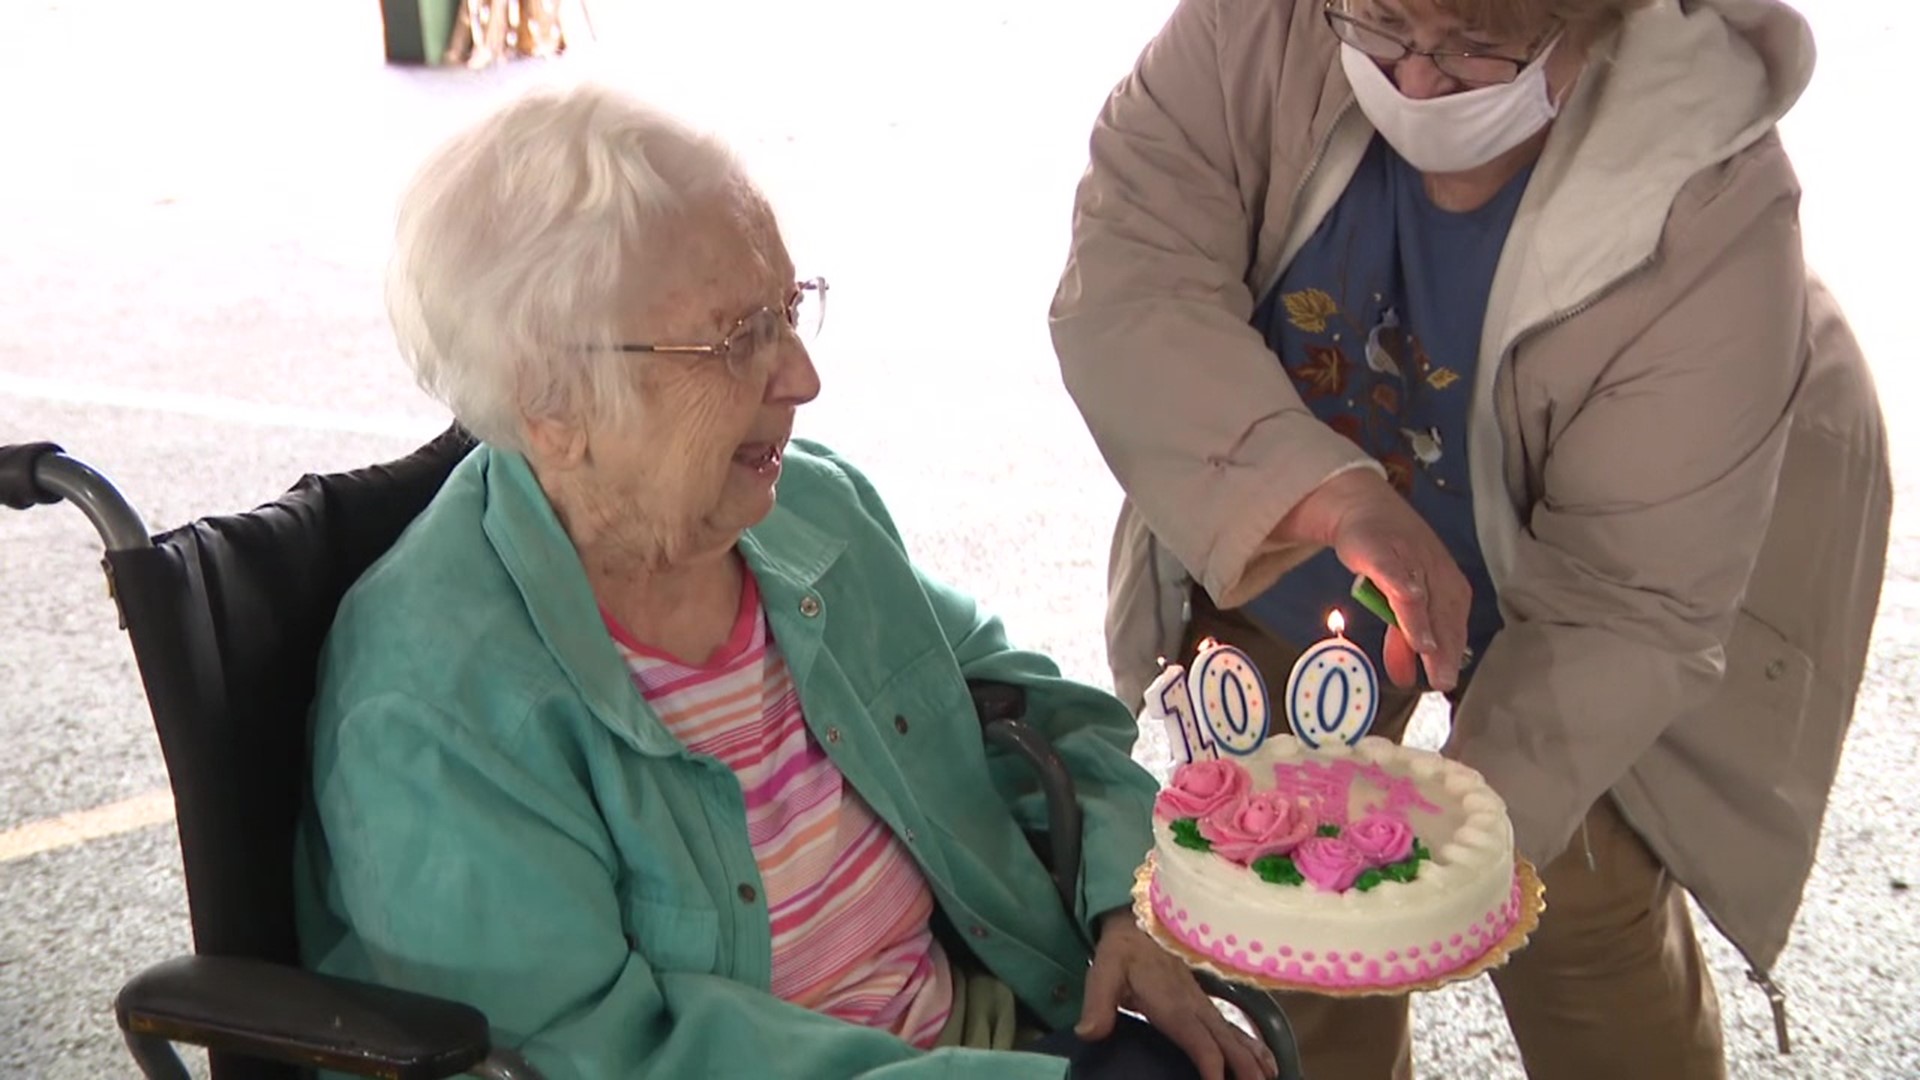 It's not every day you turn 100-years-old, but a woman in the Poconos celebrated that milestone with her church family and friends.